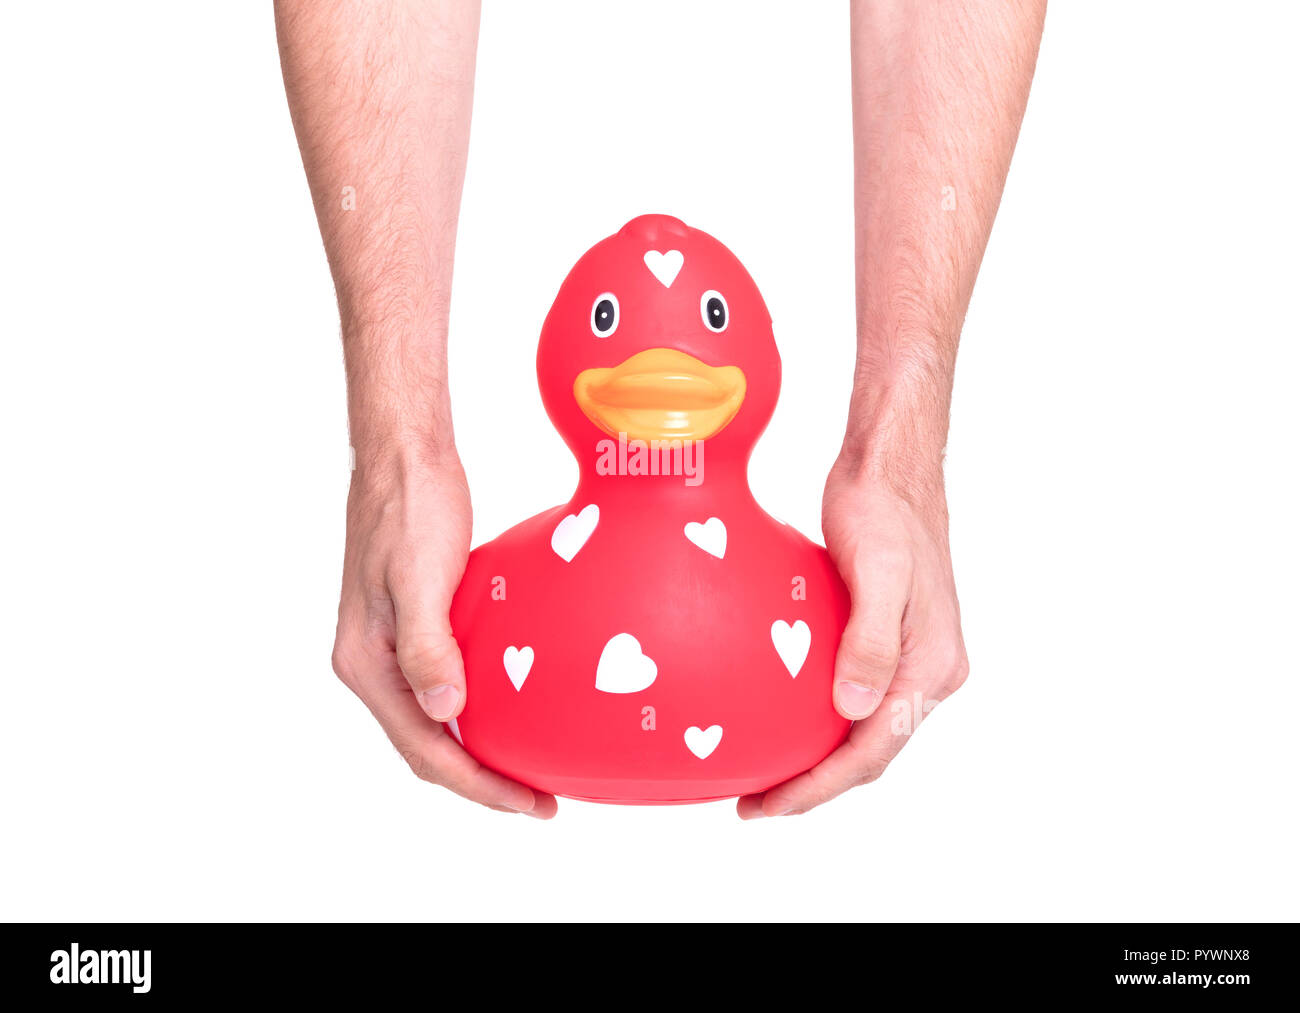 Hands holding large red rubber duck, isolated on white Stock Photo